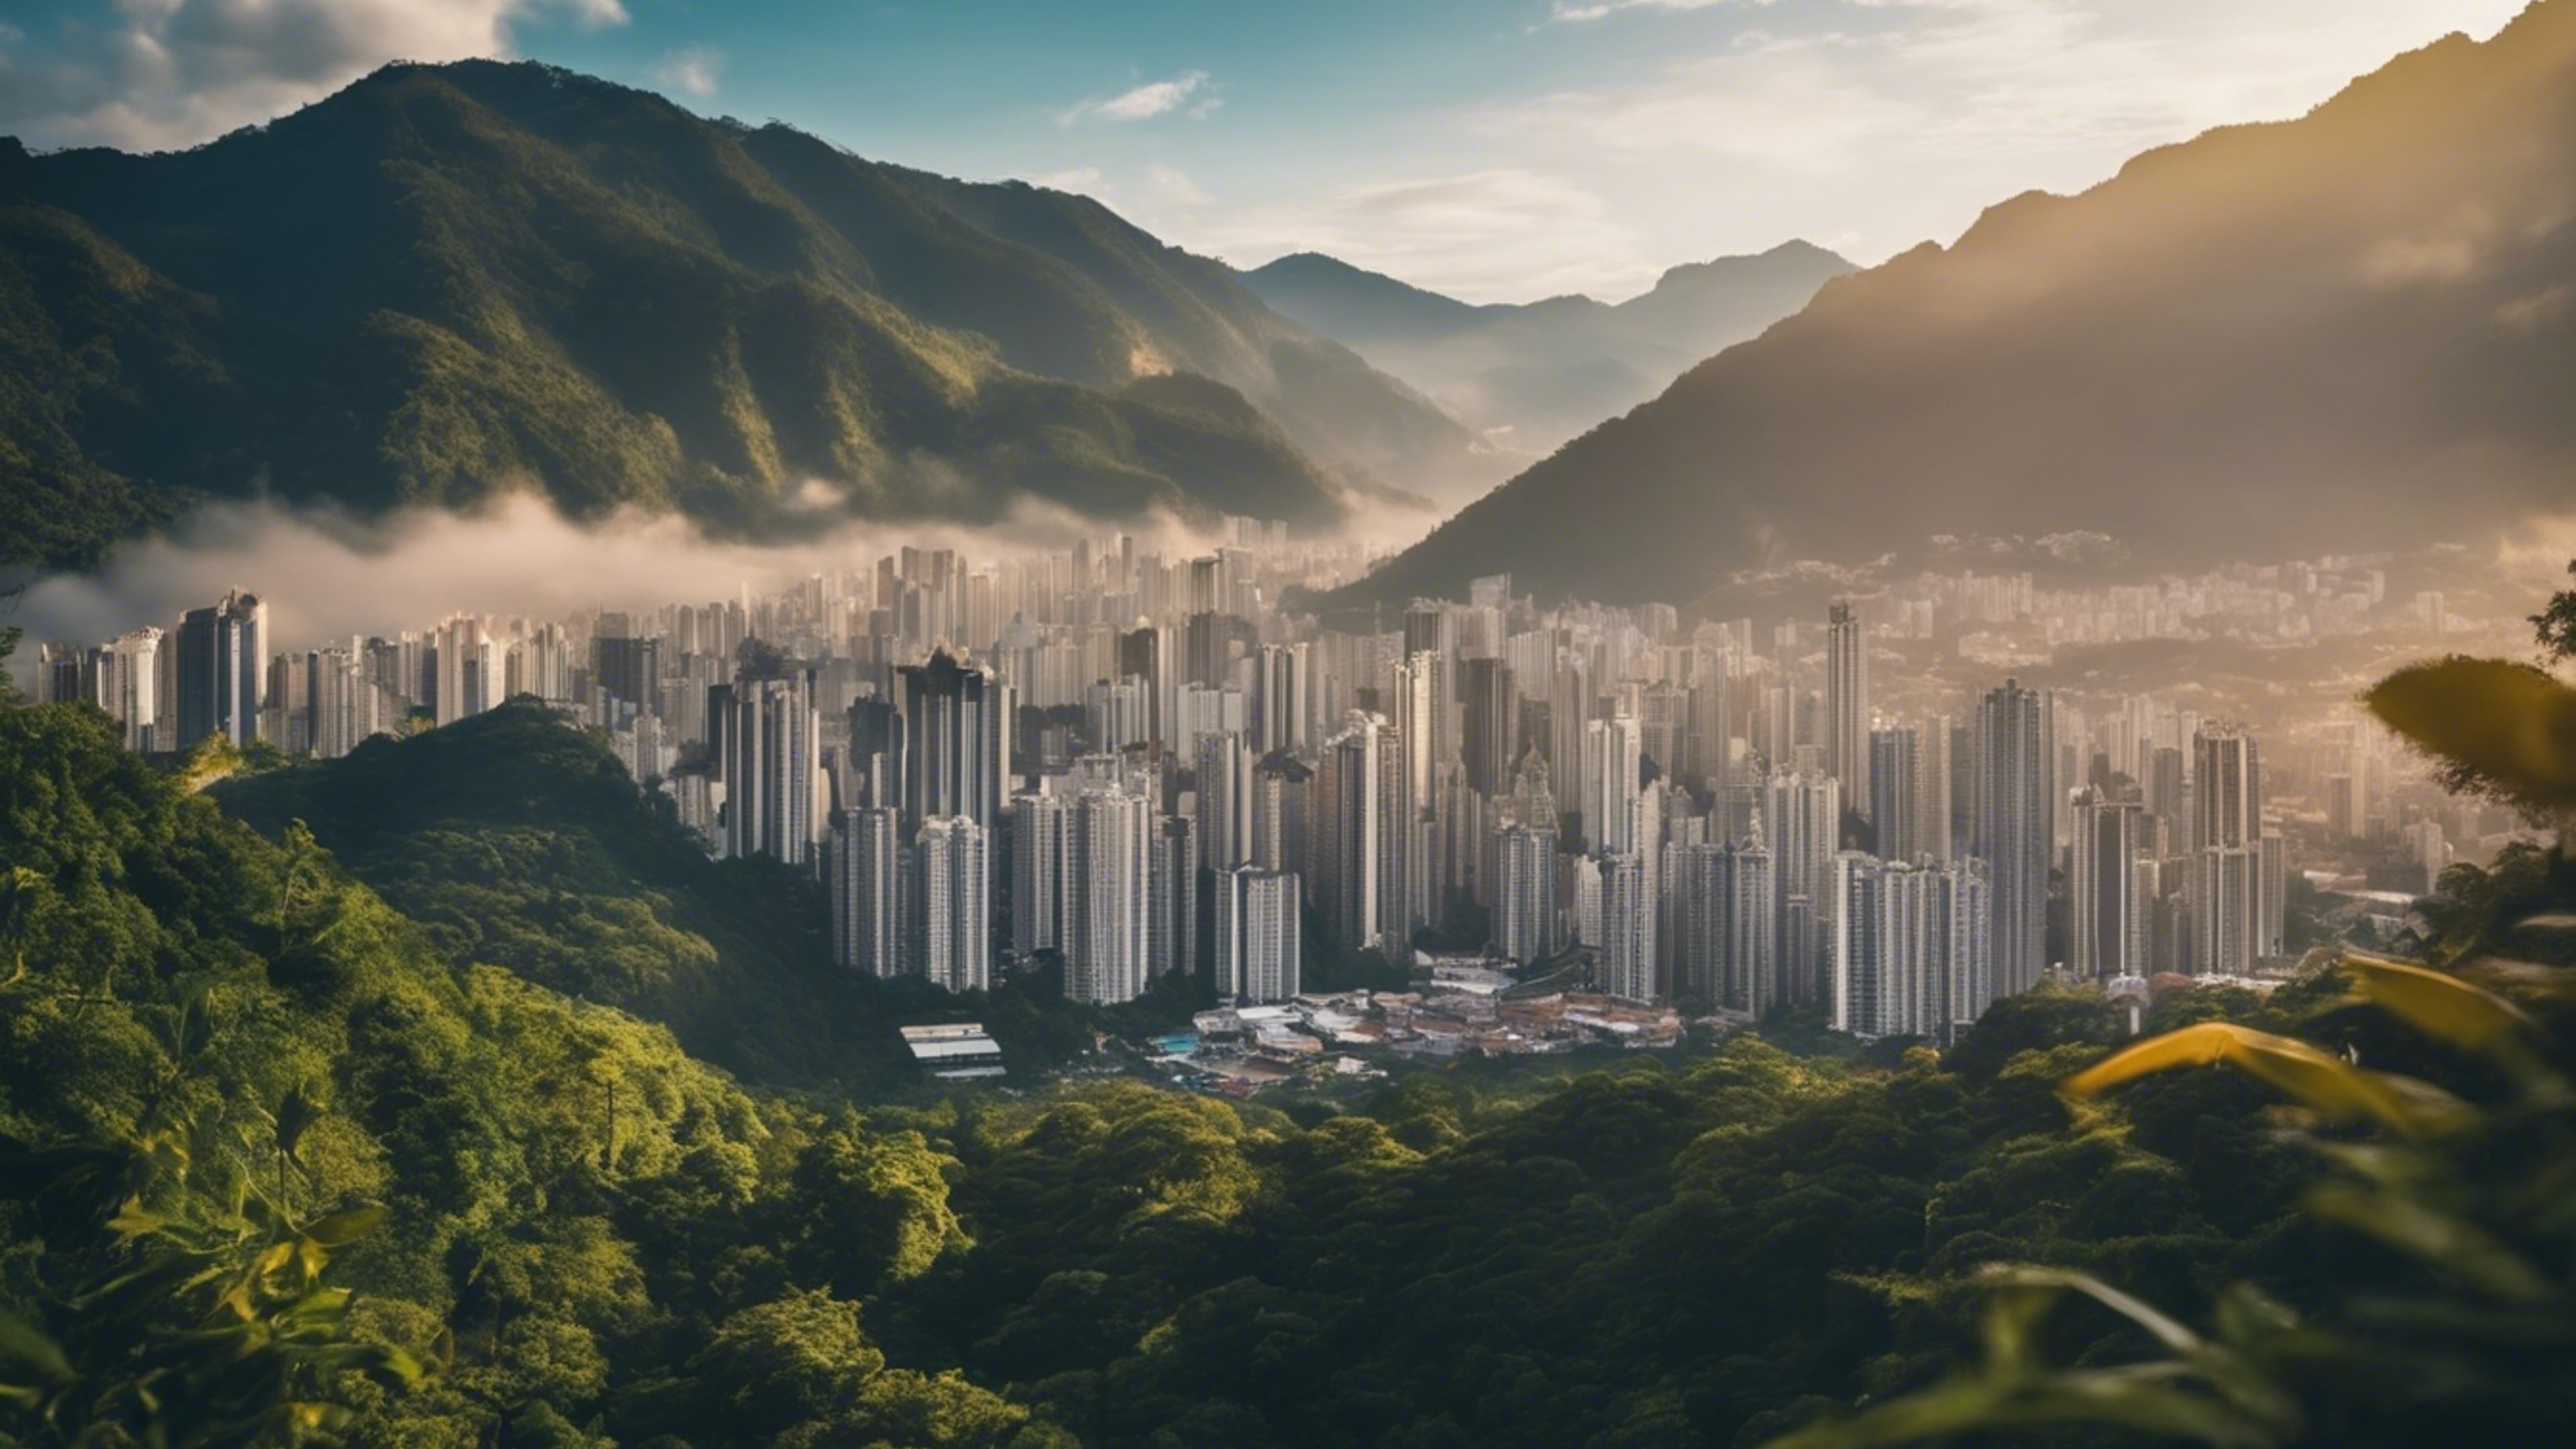 The enchanting skyline of a mountain range rainforest city in the heart of nature. Tapet[97852b95a374431baf05]